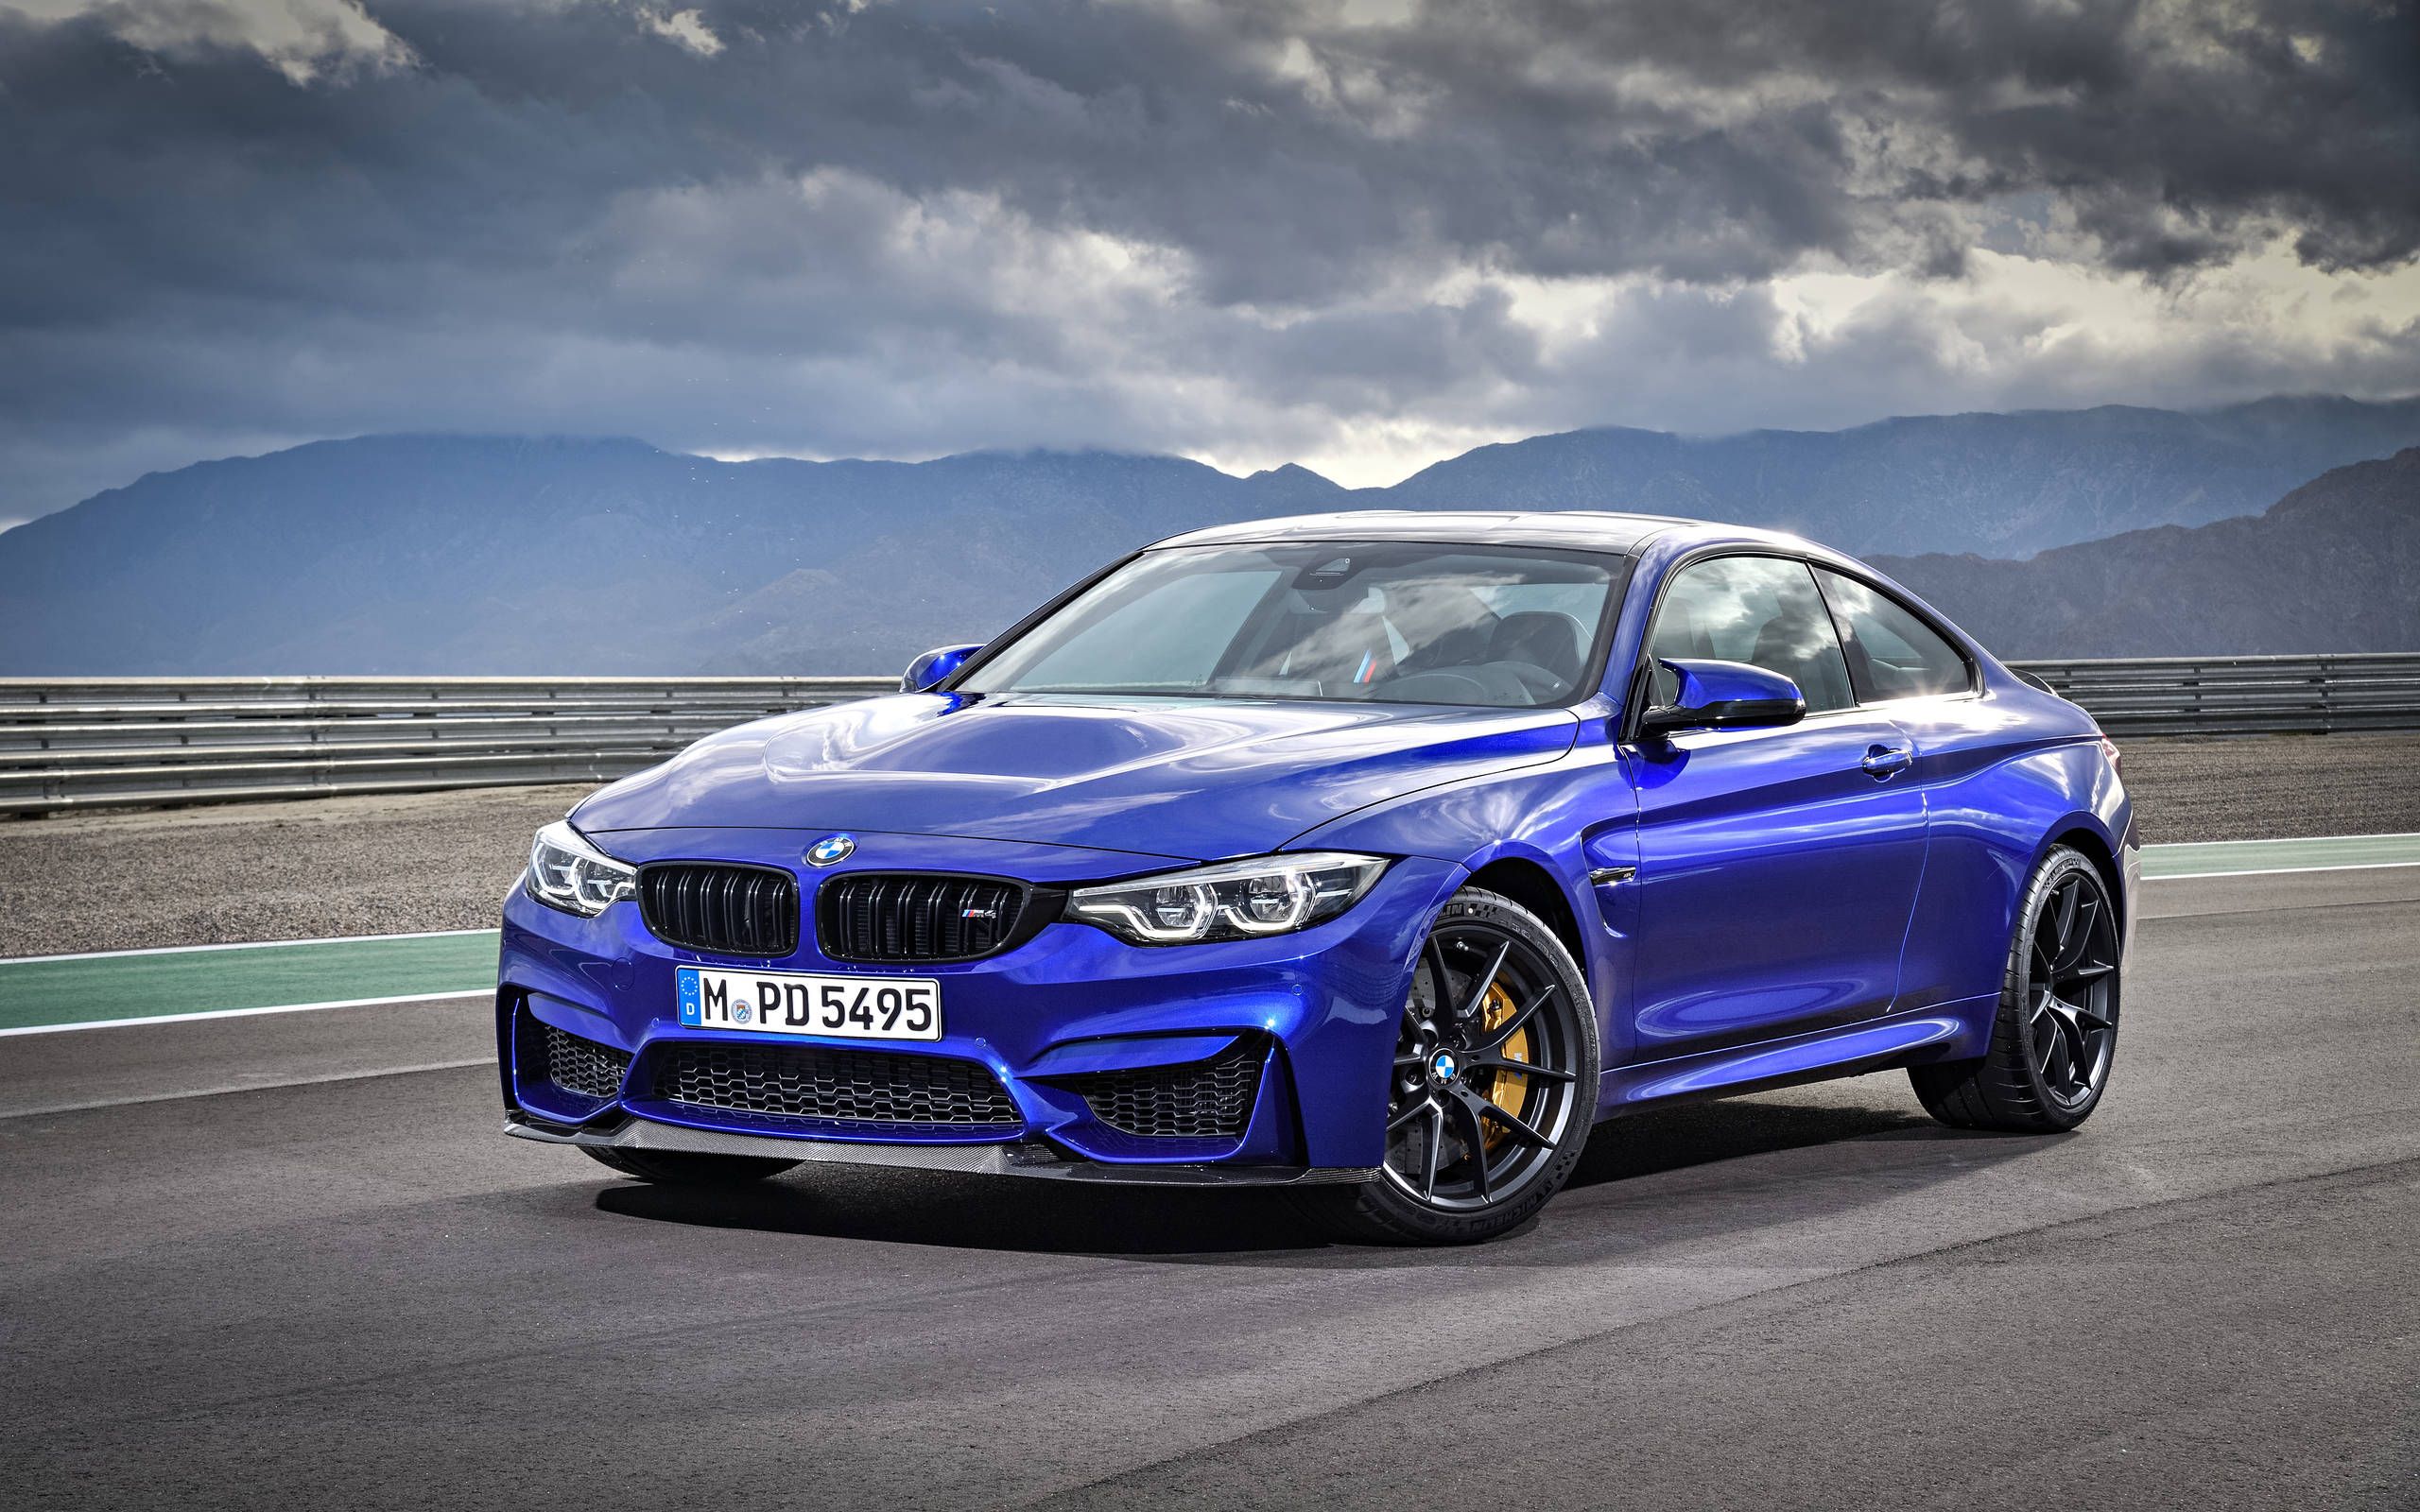 Shanghai surprise: BMW M4 CS wedges itself between M4 Comp and GTS